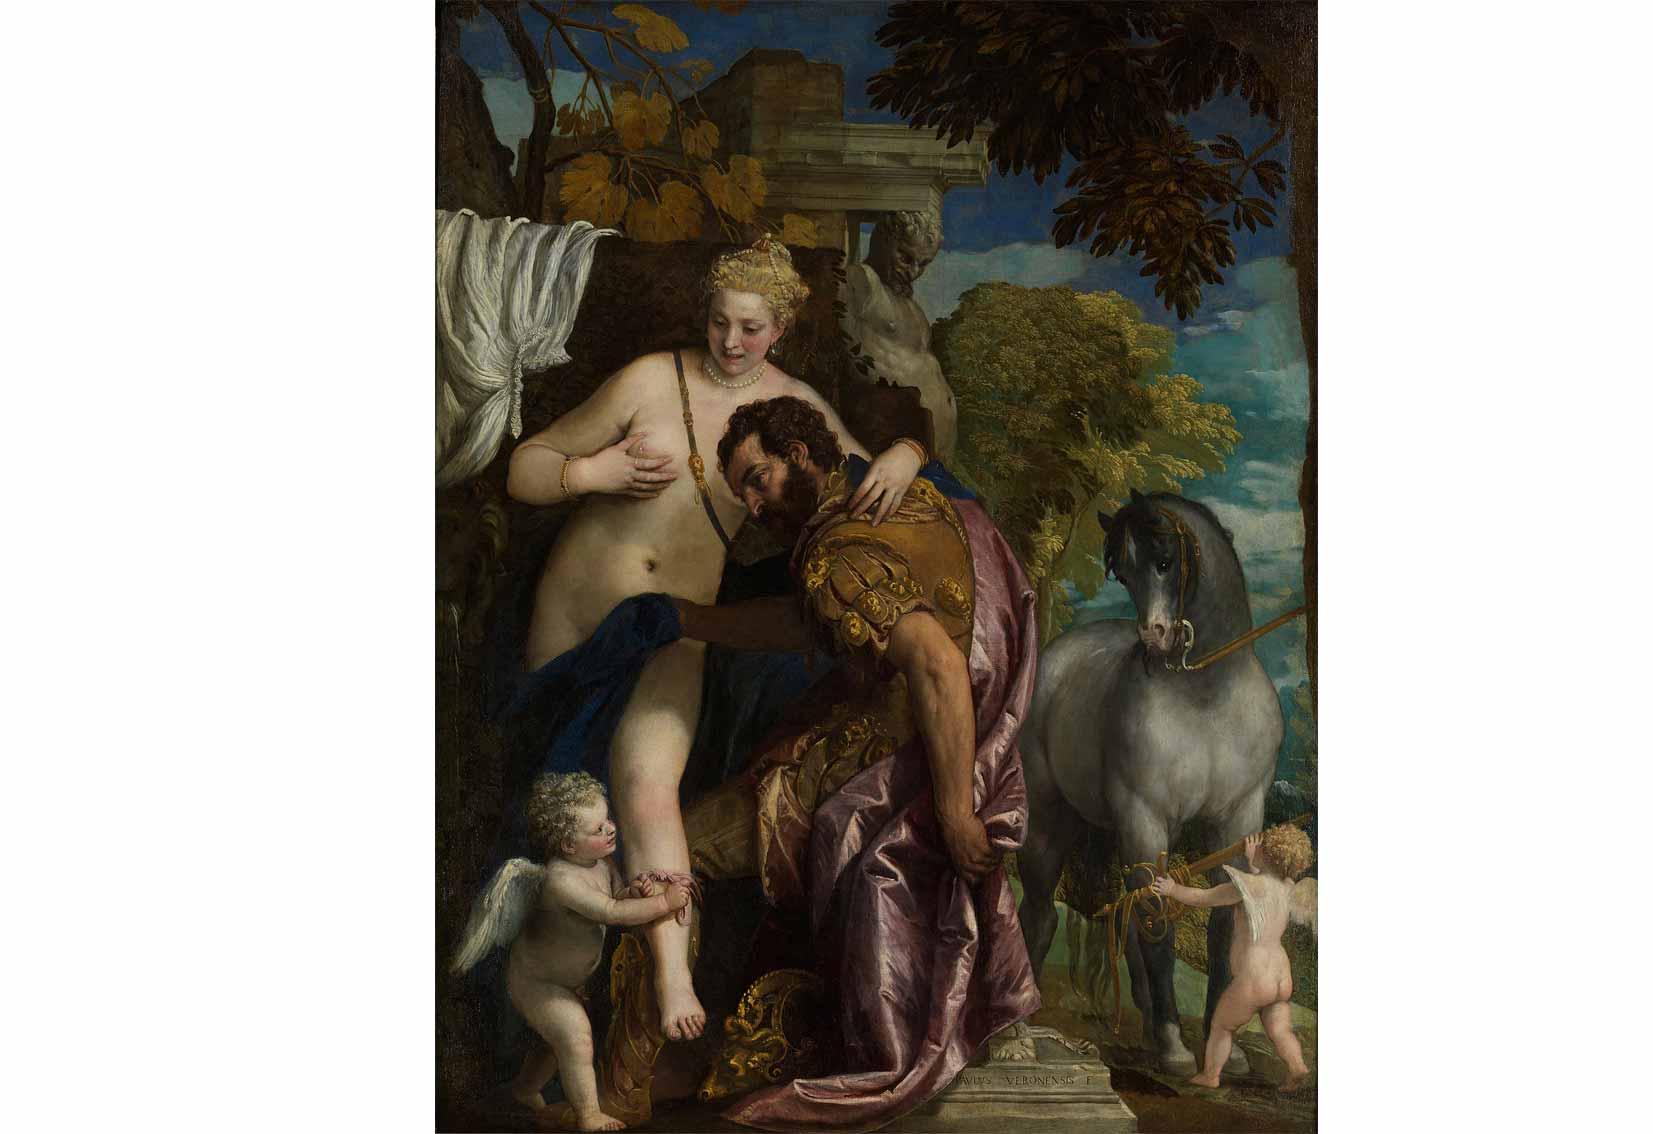 Paolo Veronese, Mars and Venus United by Love, c. 1570s.